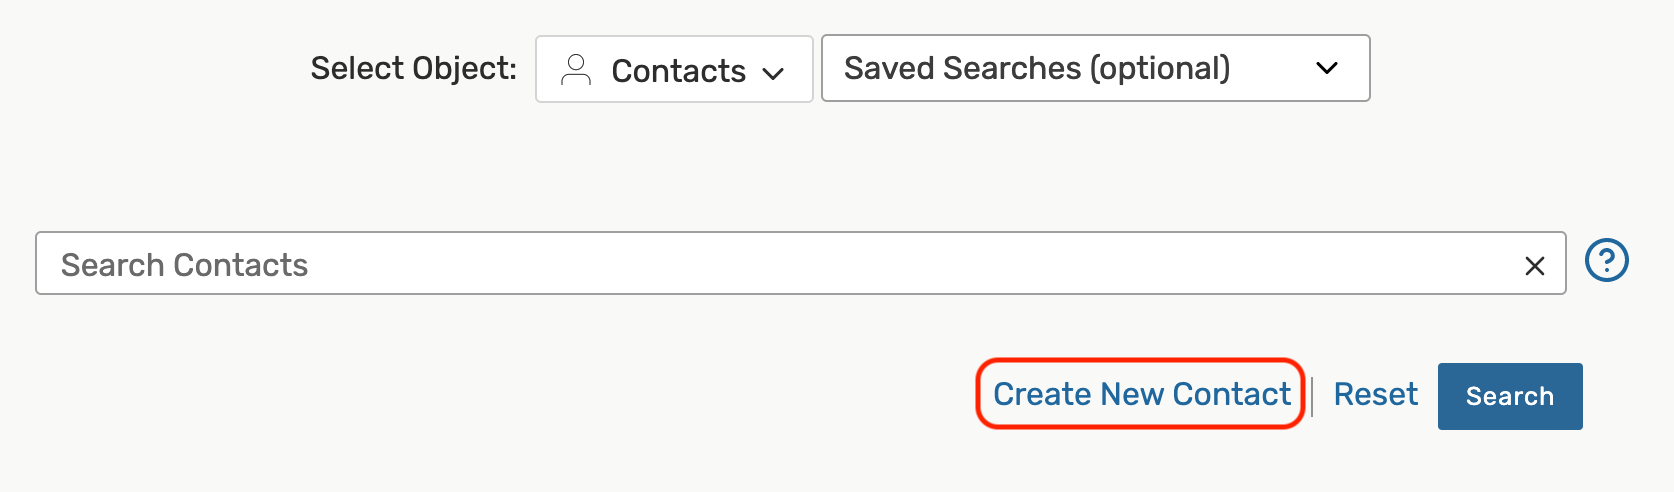 create new contact option on contact search page